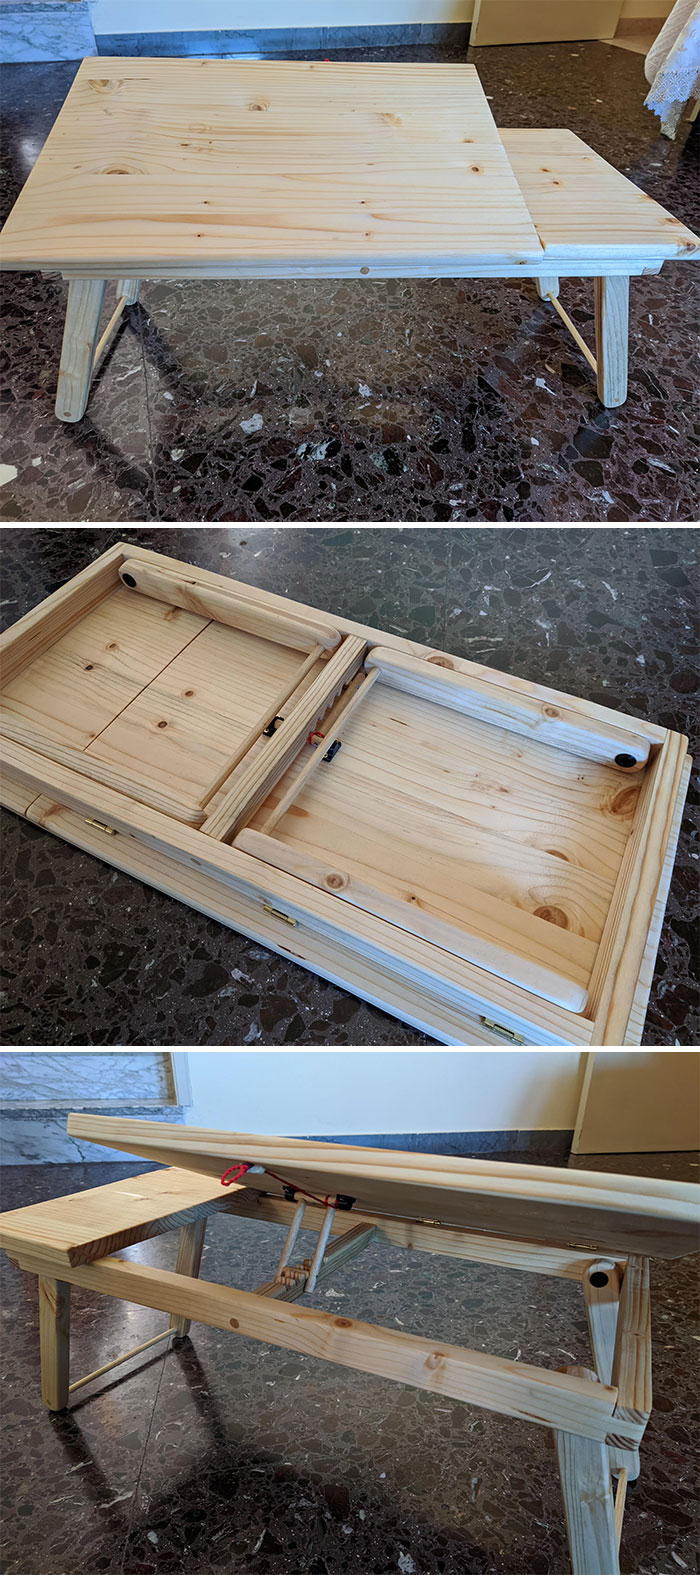 First Wood Project I Made For My Girlfriend, A Small Table For Laptop. I'm A Beginner So I've Just Used A Jigsaw, A Drill And A Lot Of Sandpaper